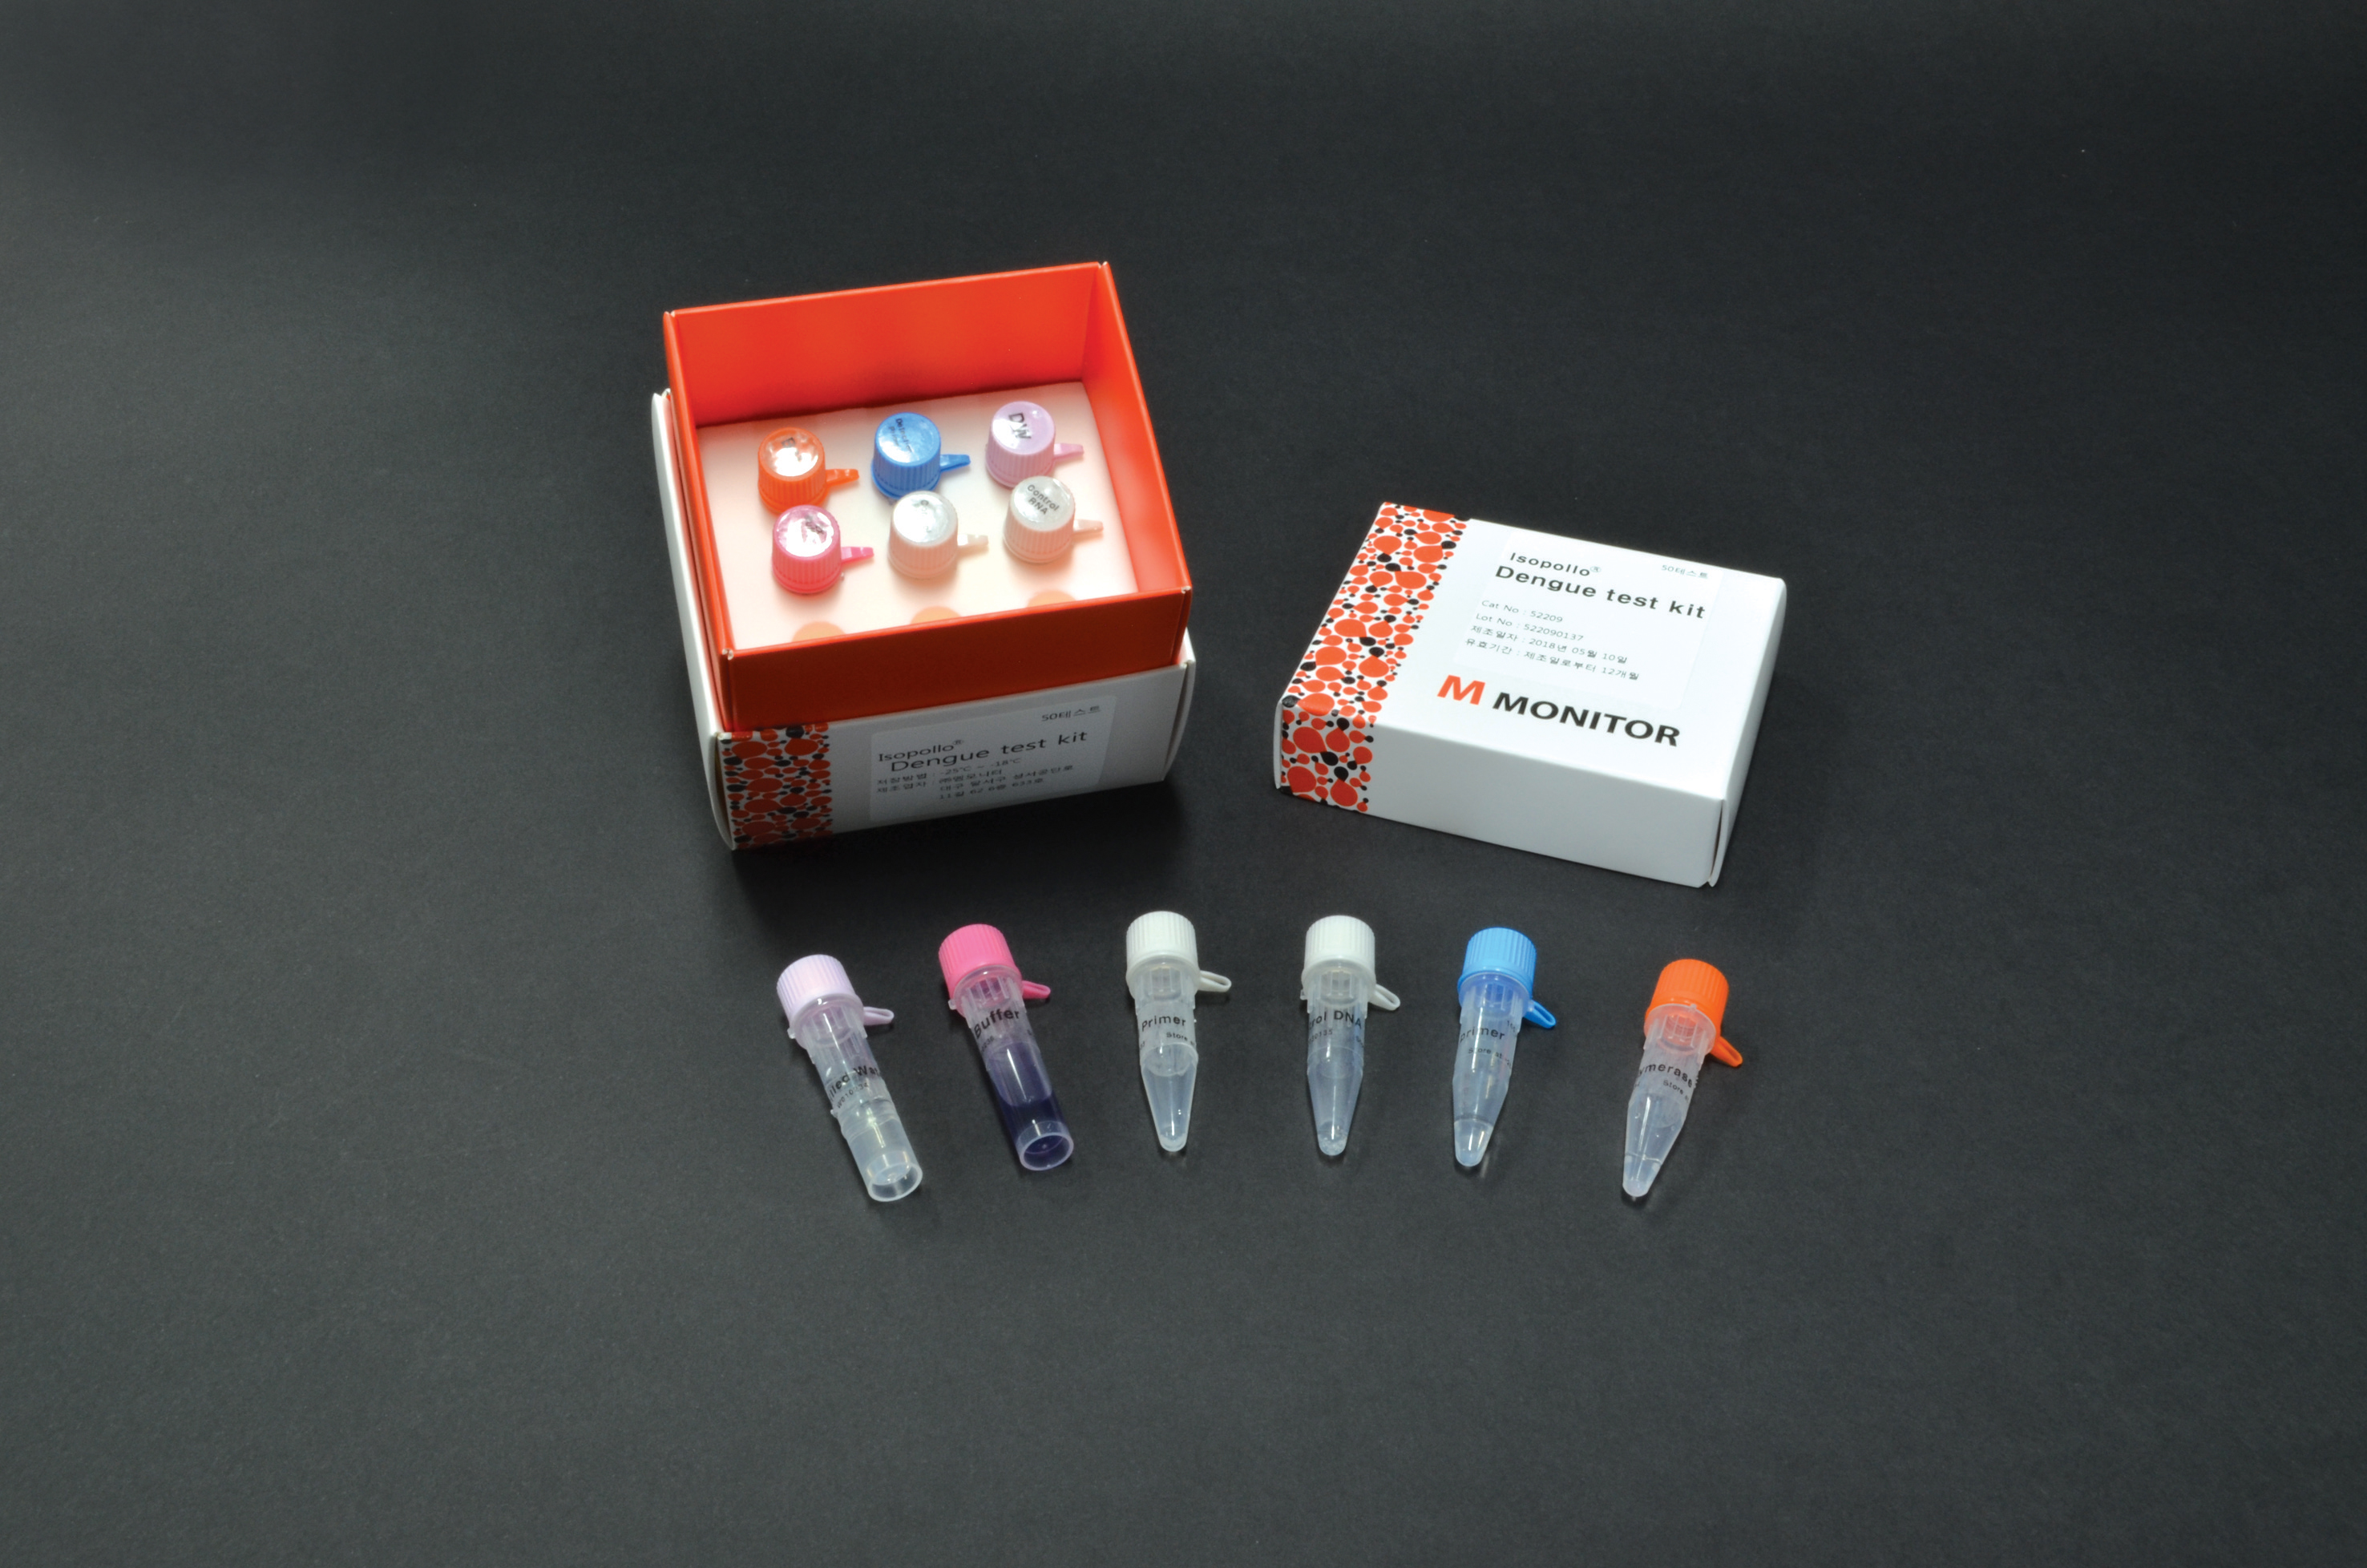 Clinical trial of IsopolloⓇ Dengue test kit was completed